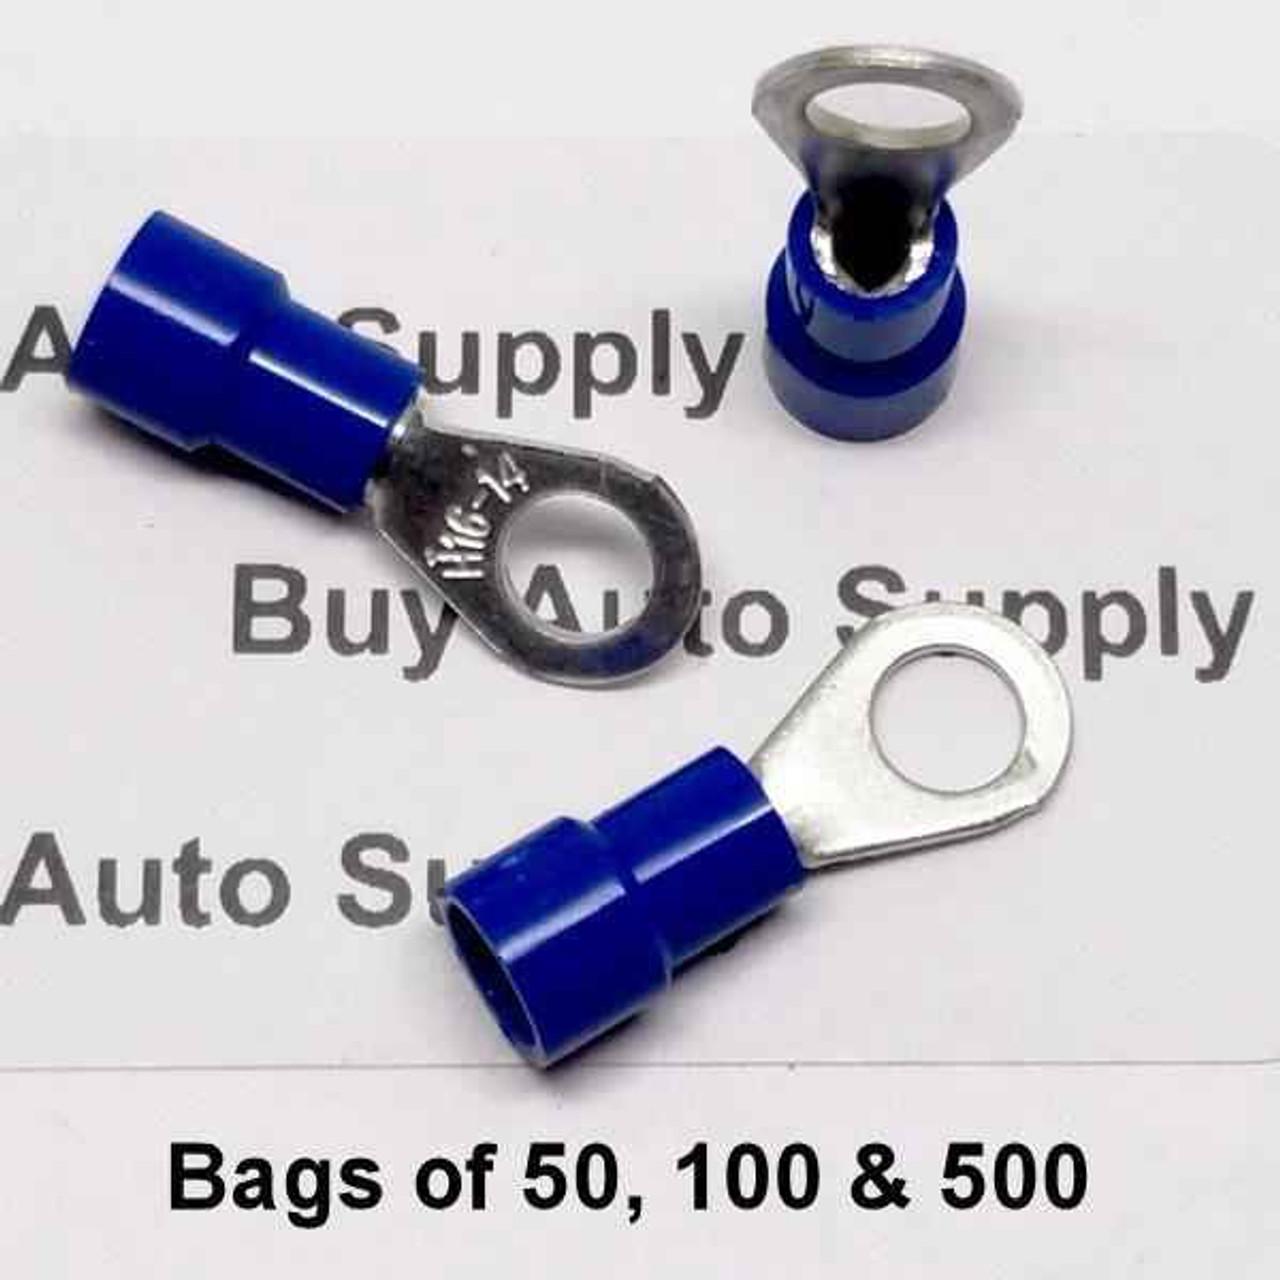 BAS14434B - Blue Vinyl Ring Connector #10 Stud 500 Count